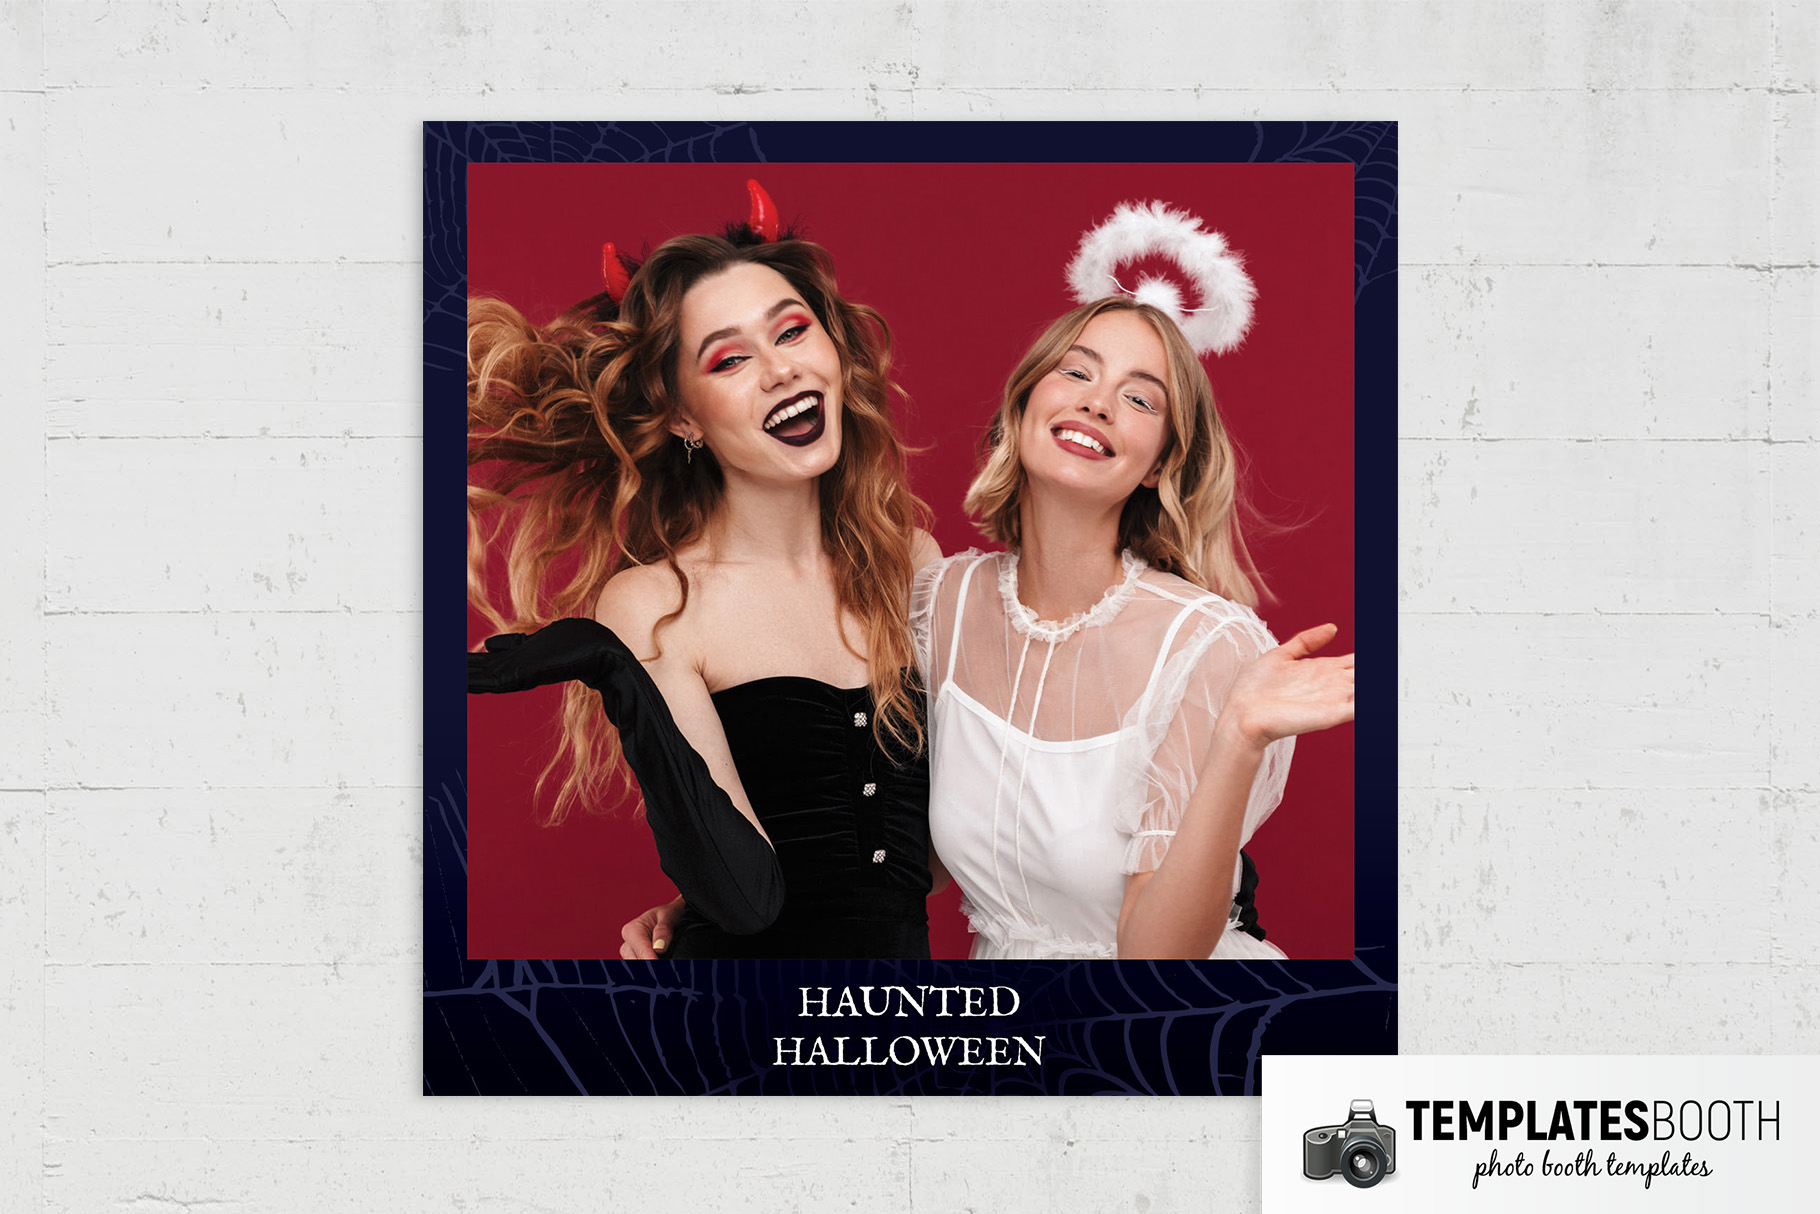 Haunted Halloween Photo Booth Template